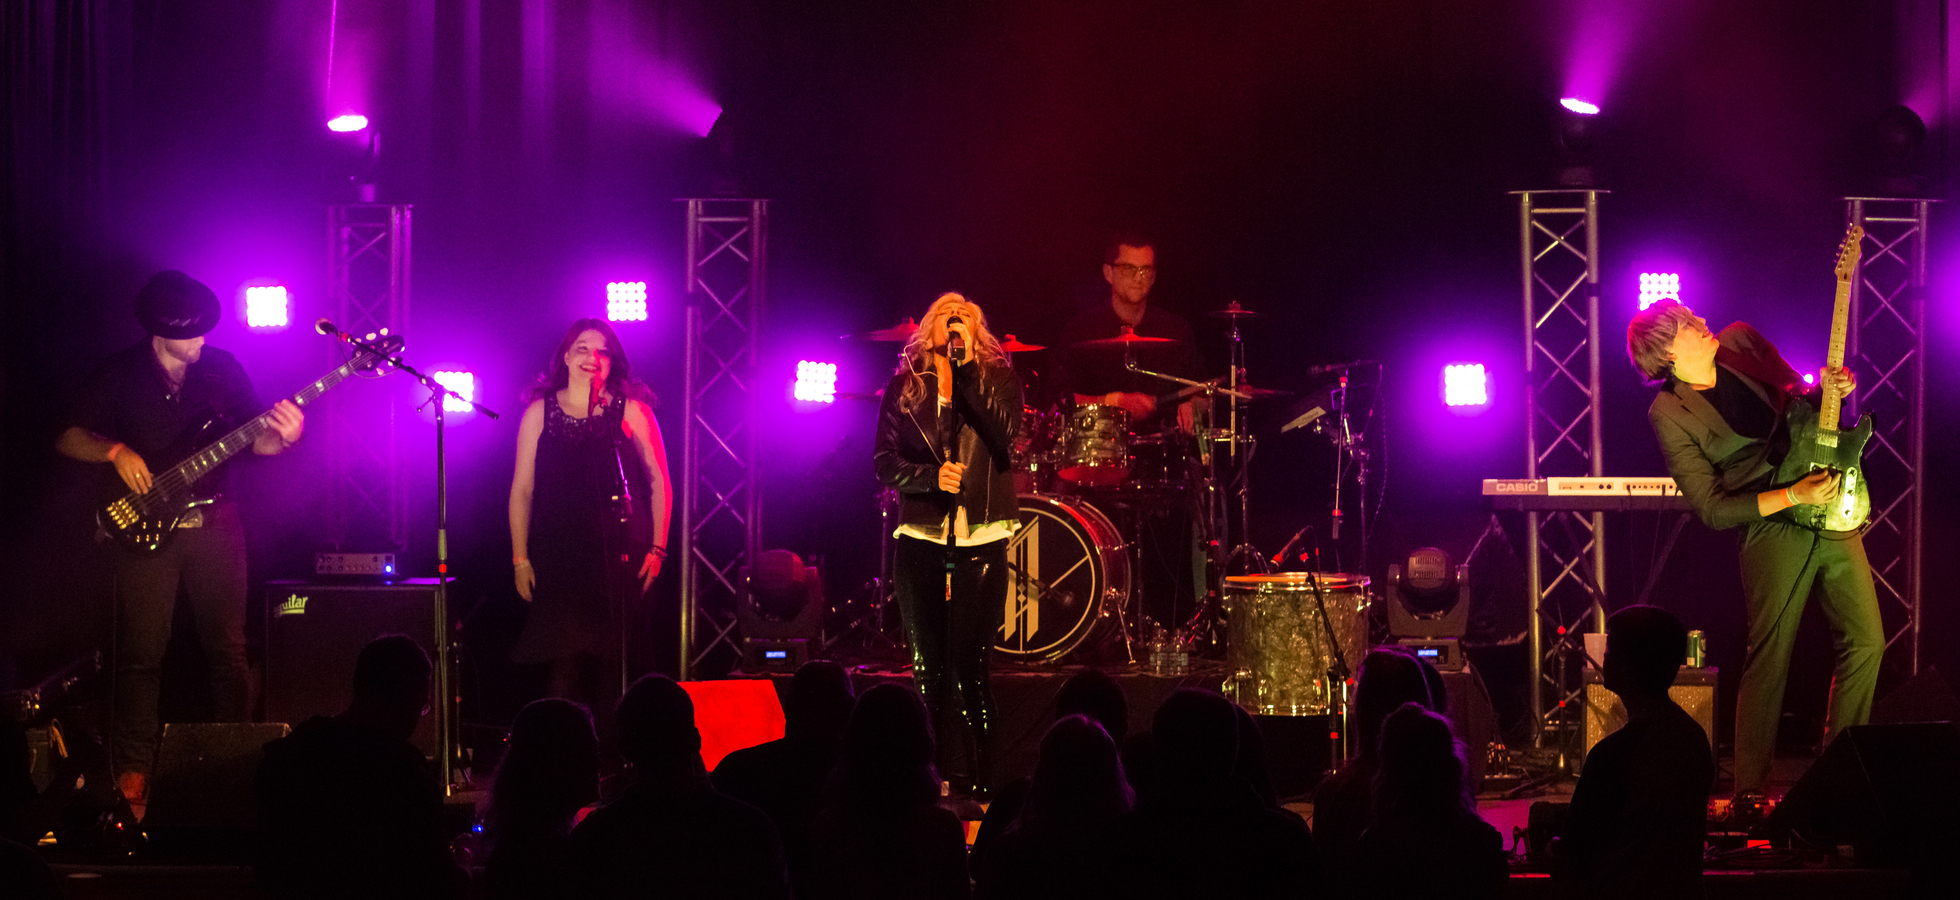 The band Adrienne O headlined the Gothic Theatre in 2015, nine years after Adrienne took her first voice lesson at age 33.